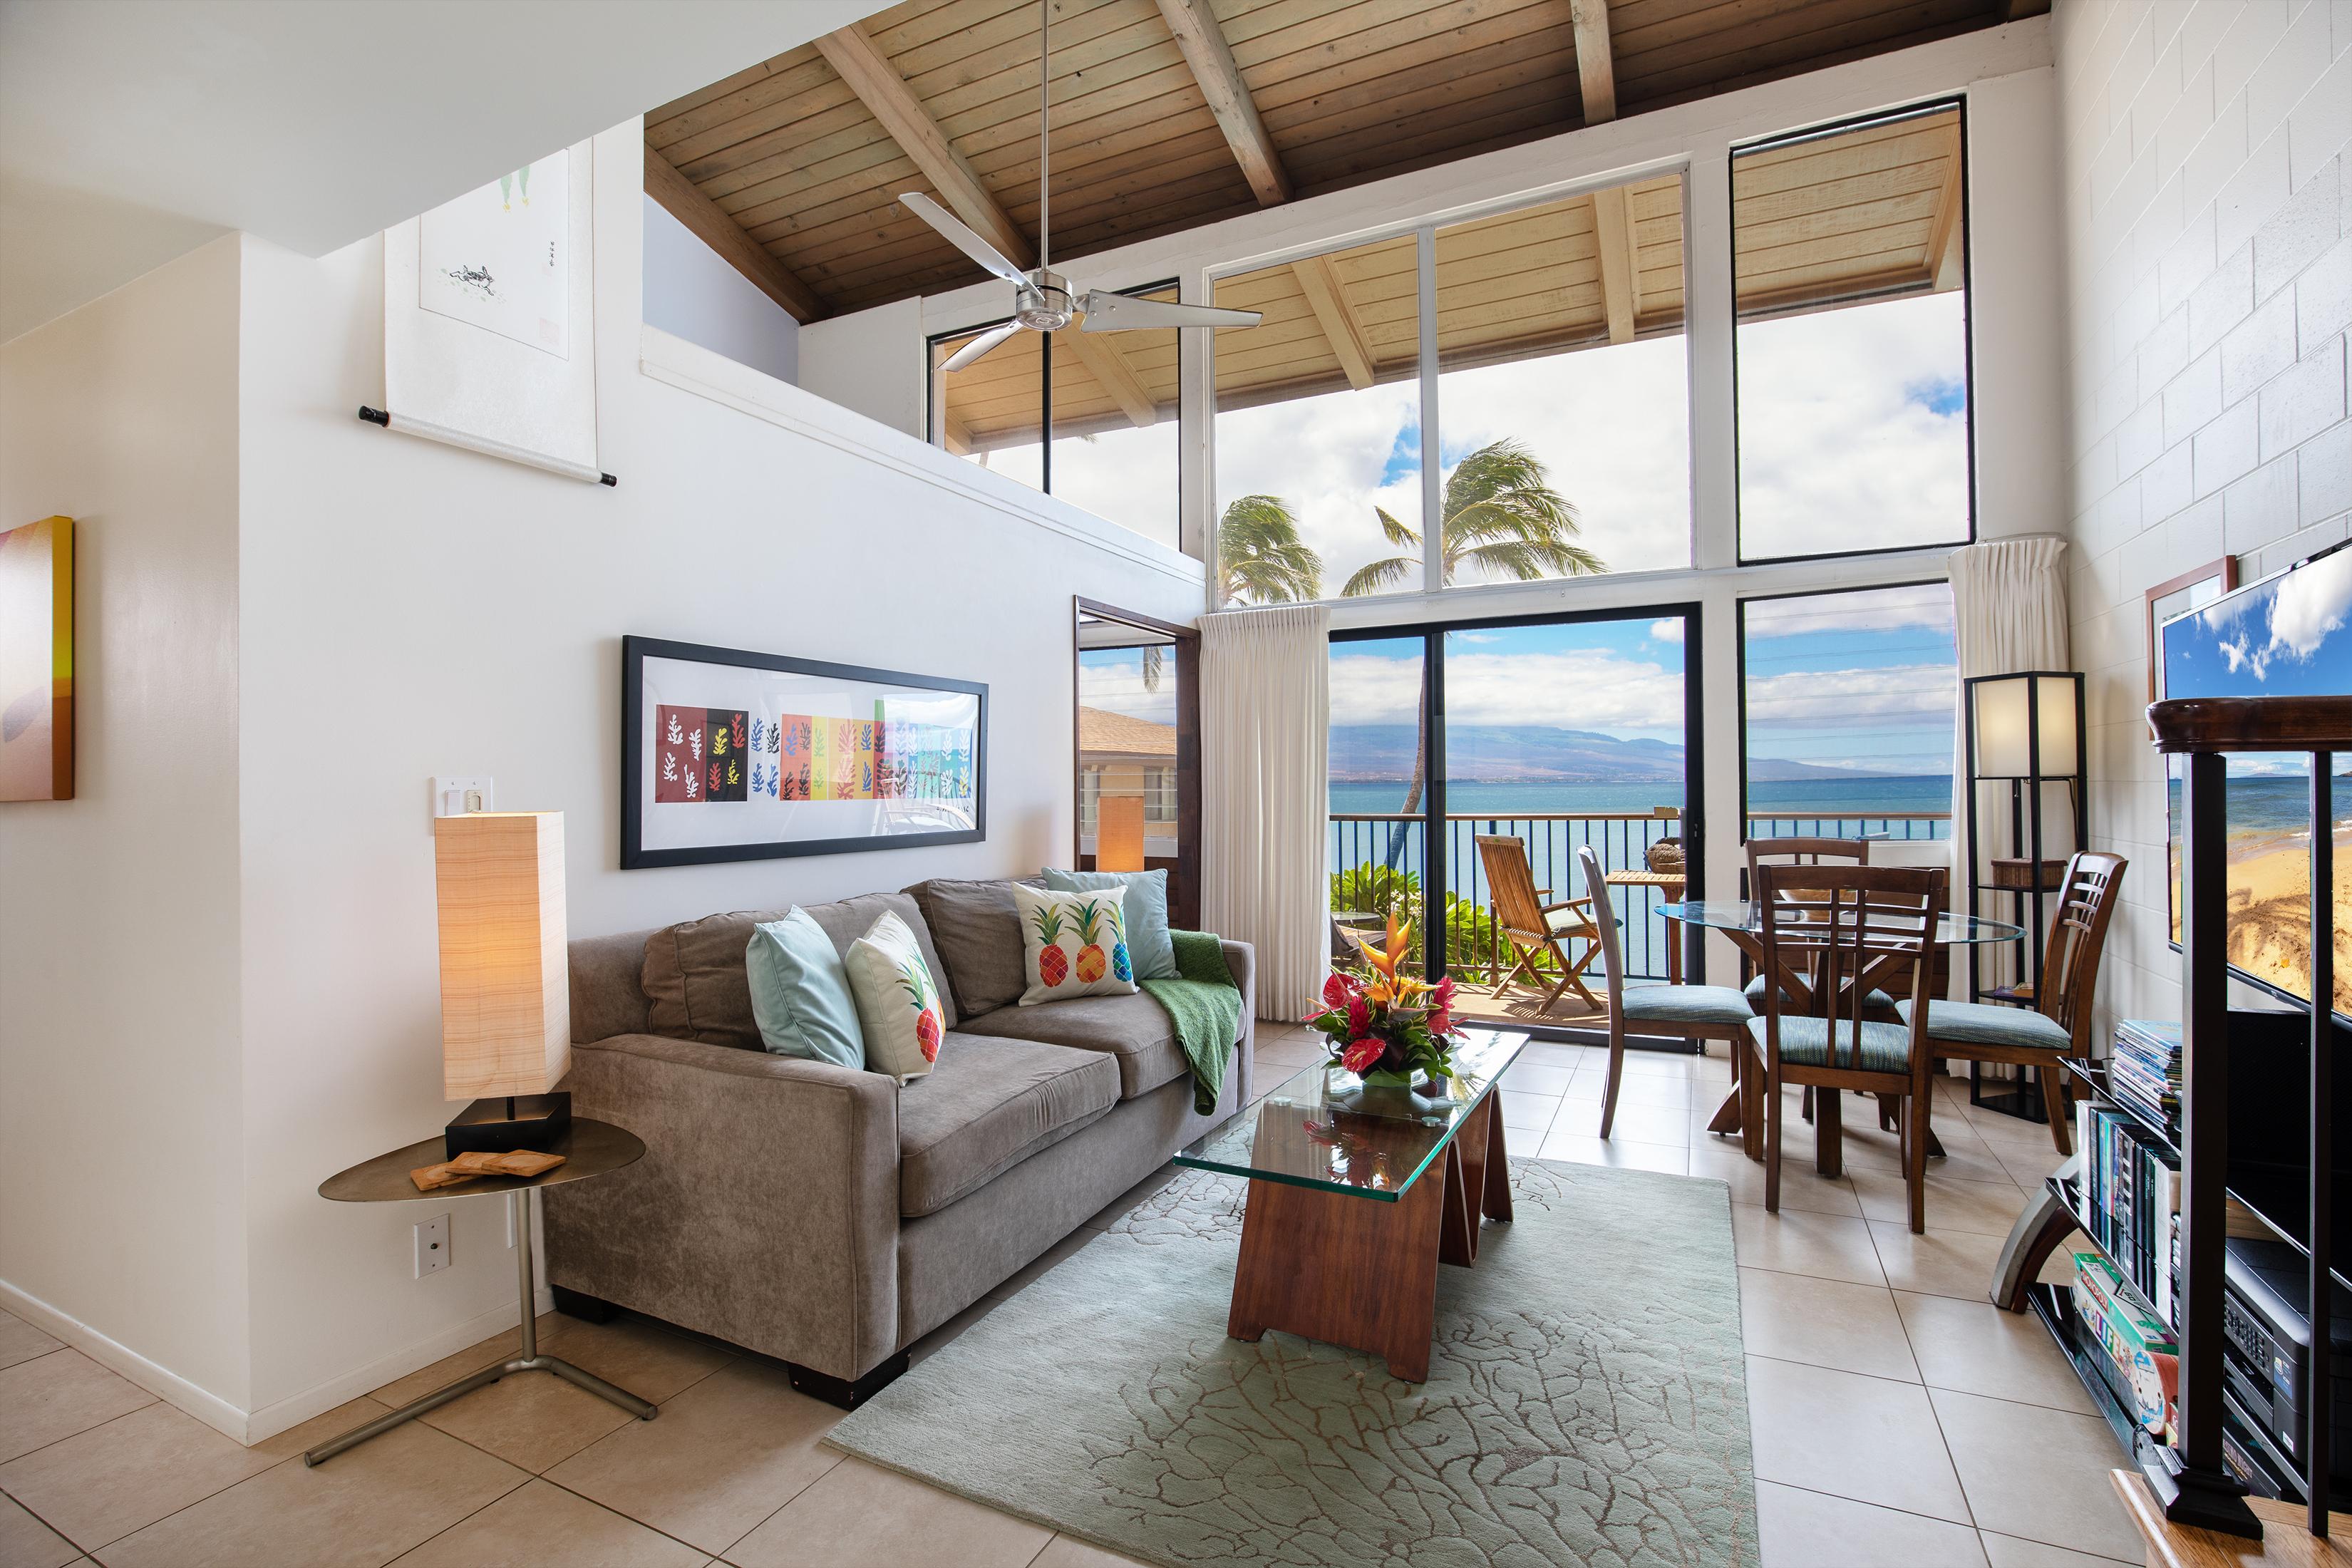 Property Image 2 - Extravagant Maui Abode with Easy Beach Front Access